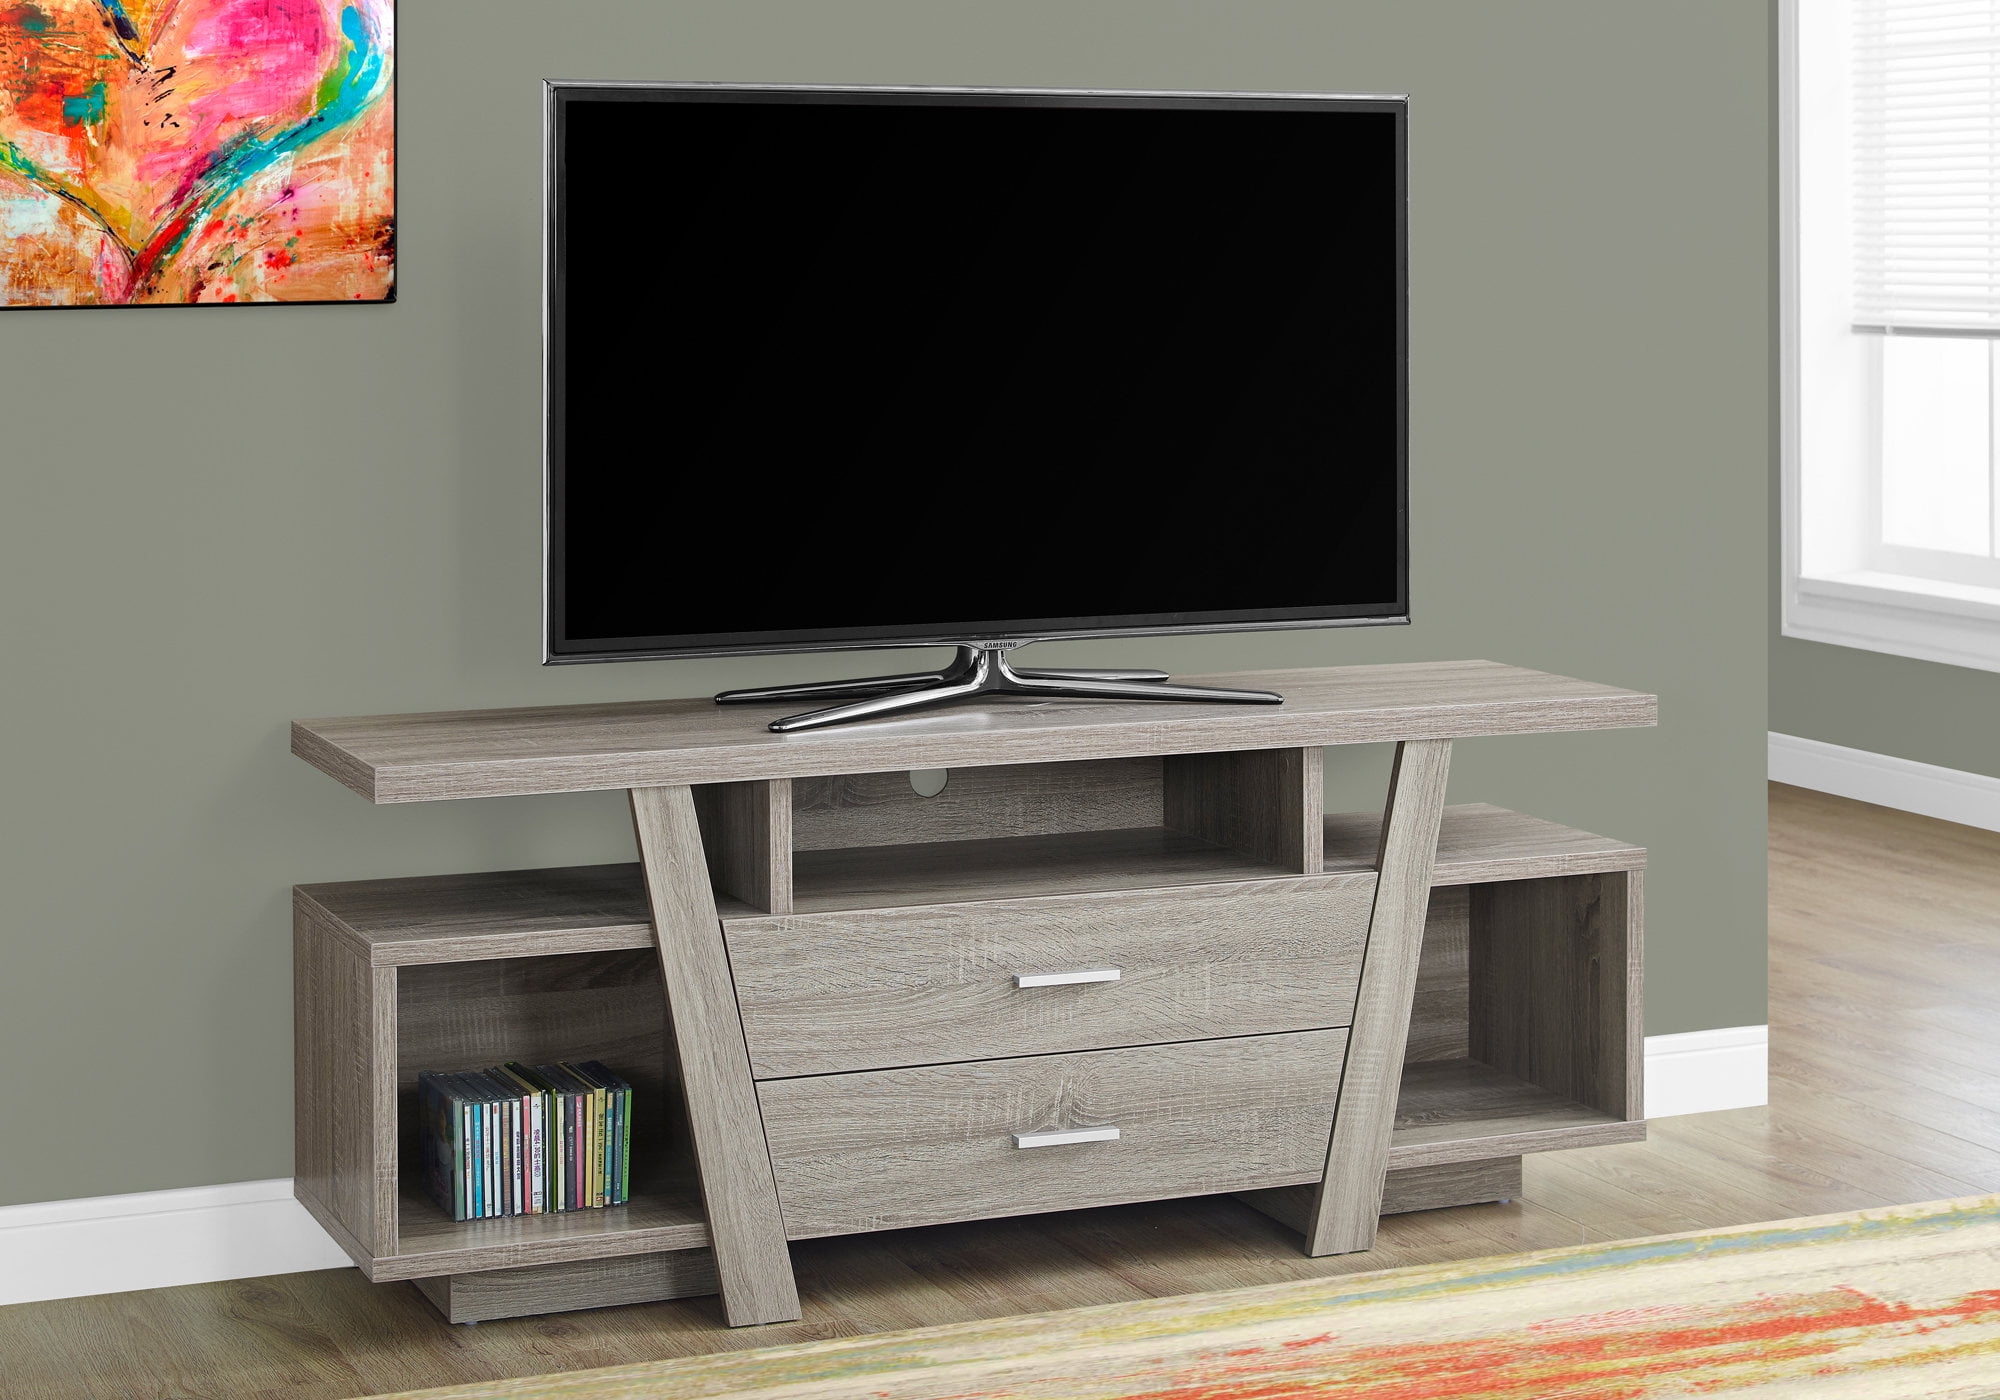 I-3528 48"L Monarch Specialities Tv Stand Dark Taupe 